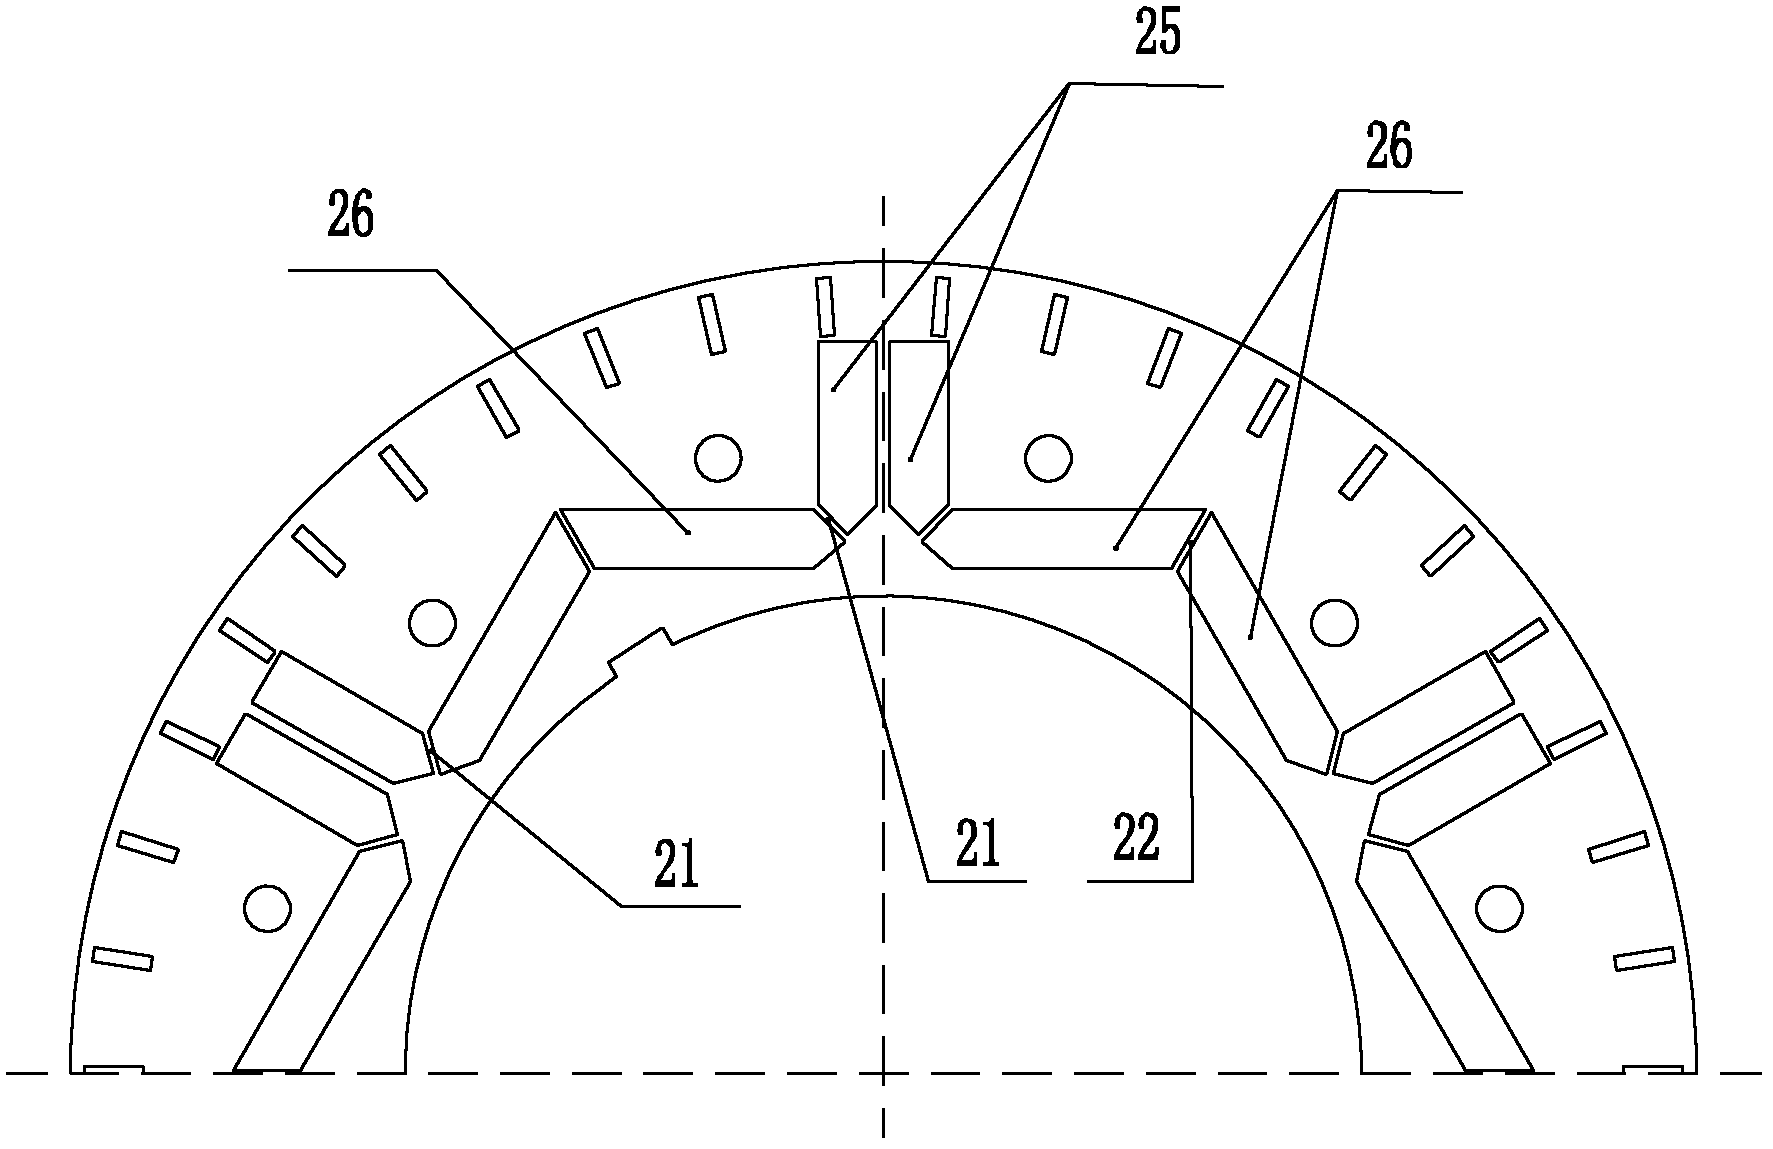 Rotor punching sheet for permanent magnet motor and rotor